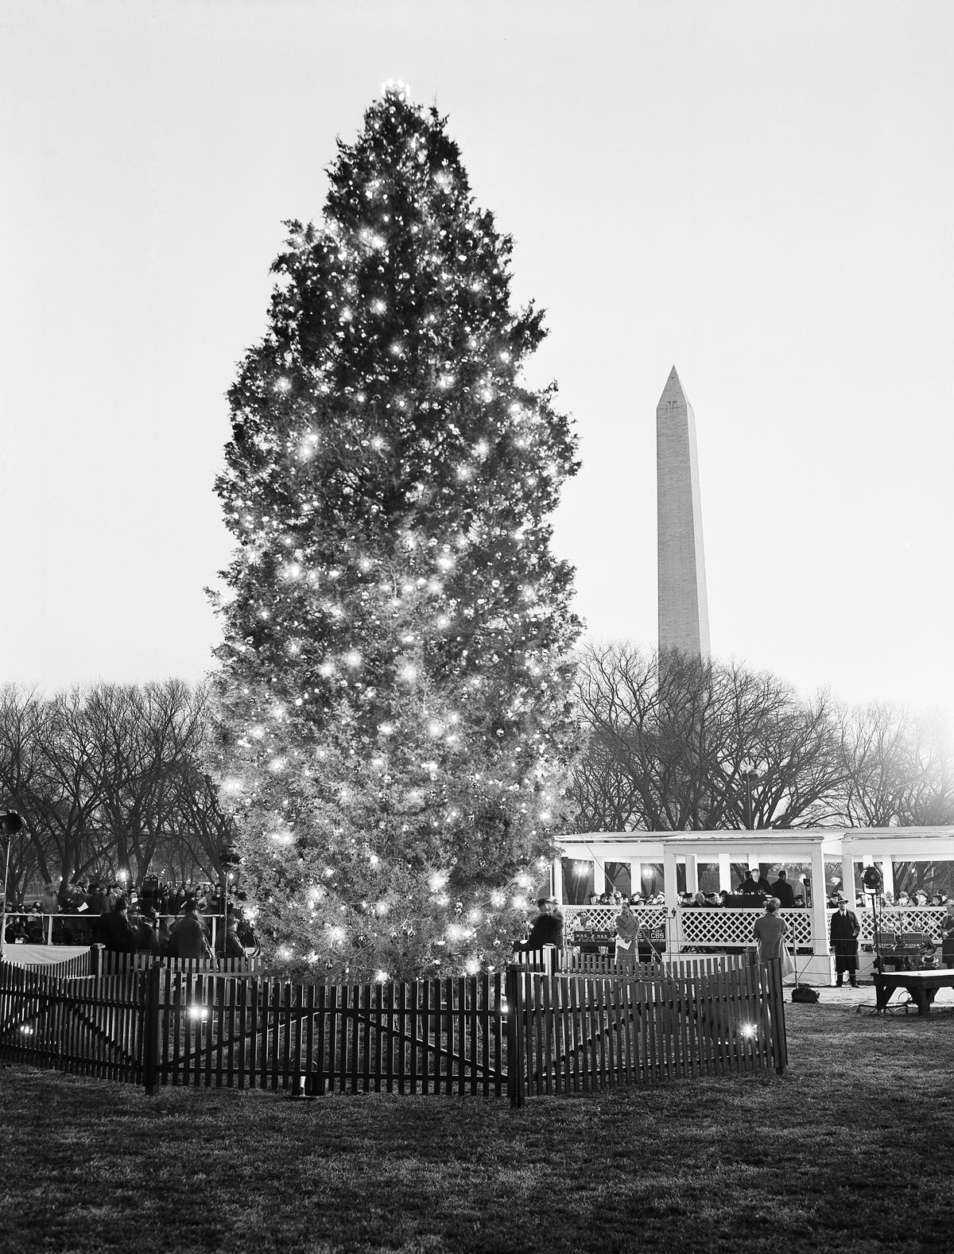 Starred with many lights is this national Christmas tree which was set a twinkling on the White House grounds at ceremonies in Washington on Dec. 24, 1940 in which F.D.R. shared. The President, standing in a platform at the right, touched a button lighting the tree and then broadcast his Christmas wishes to the nation. (AP Photo)